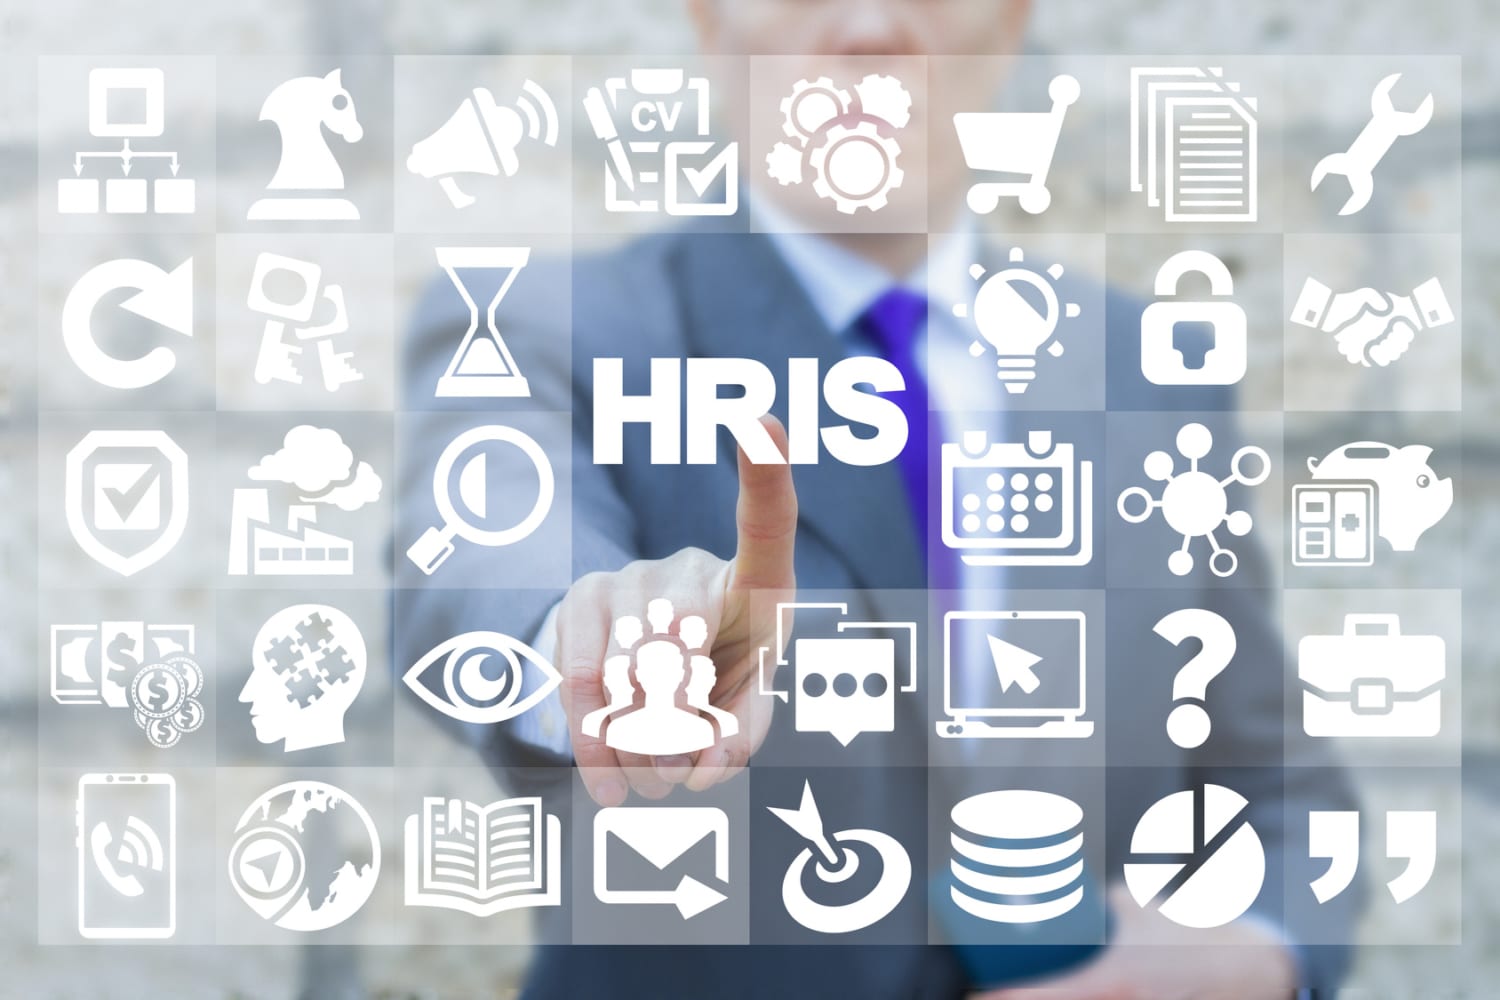 what are the benefits of HRIS